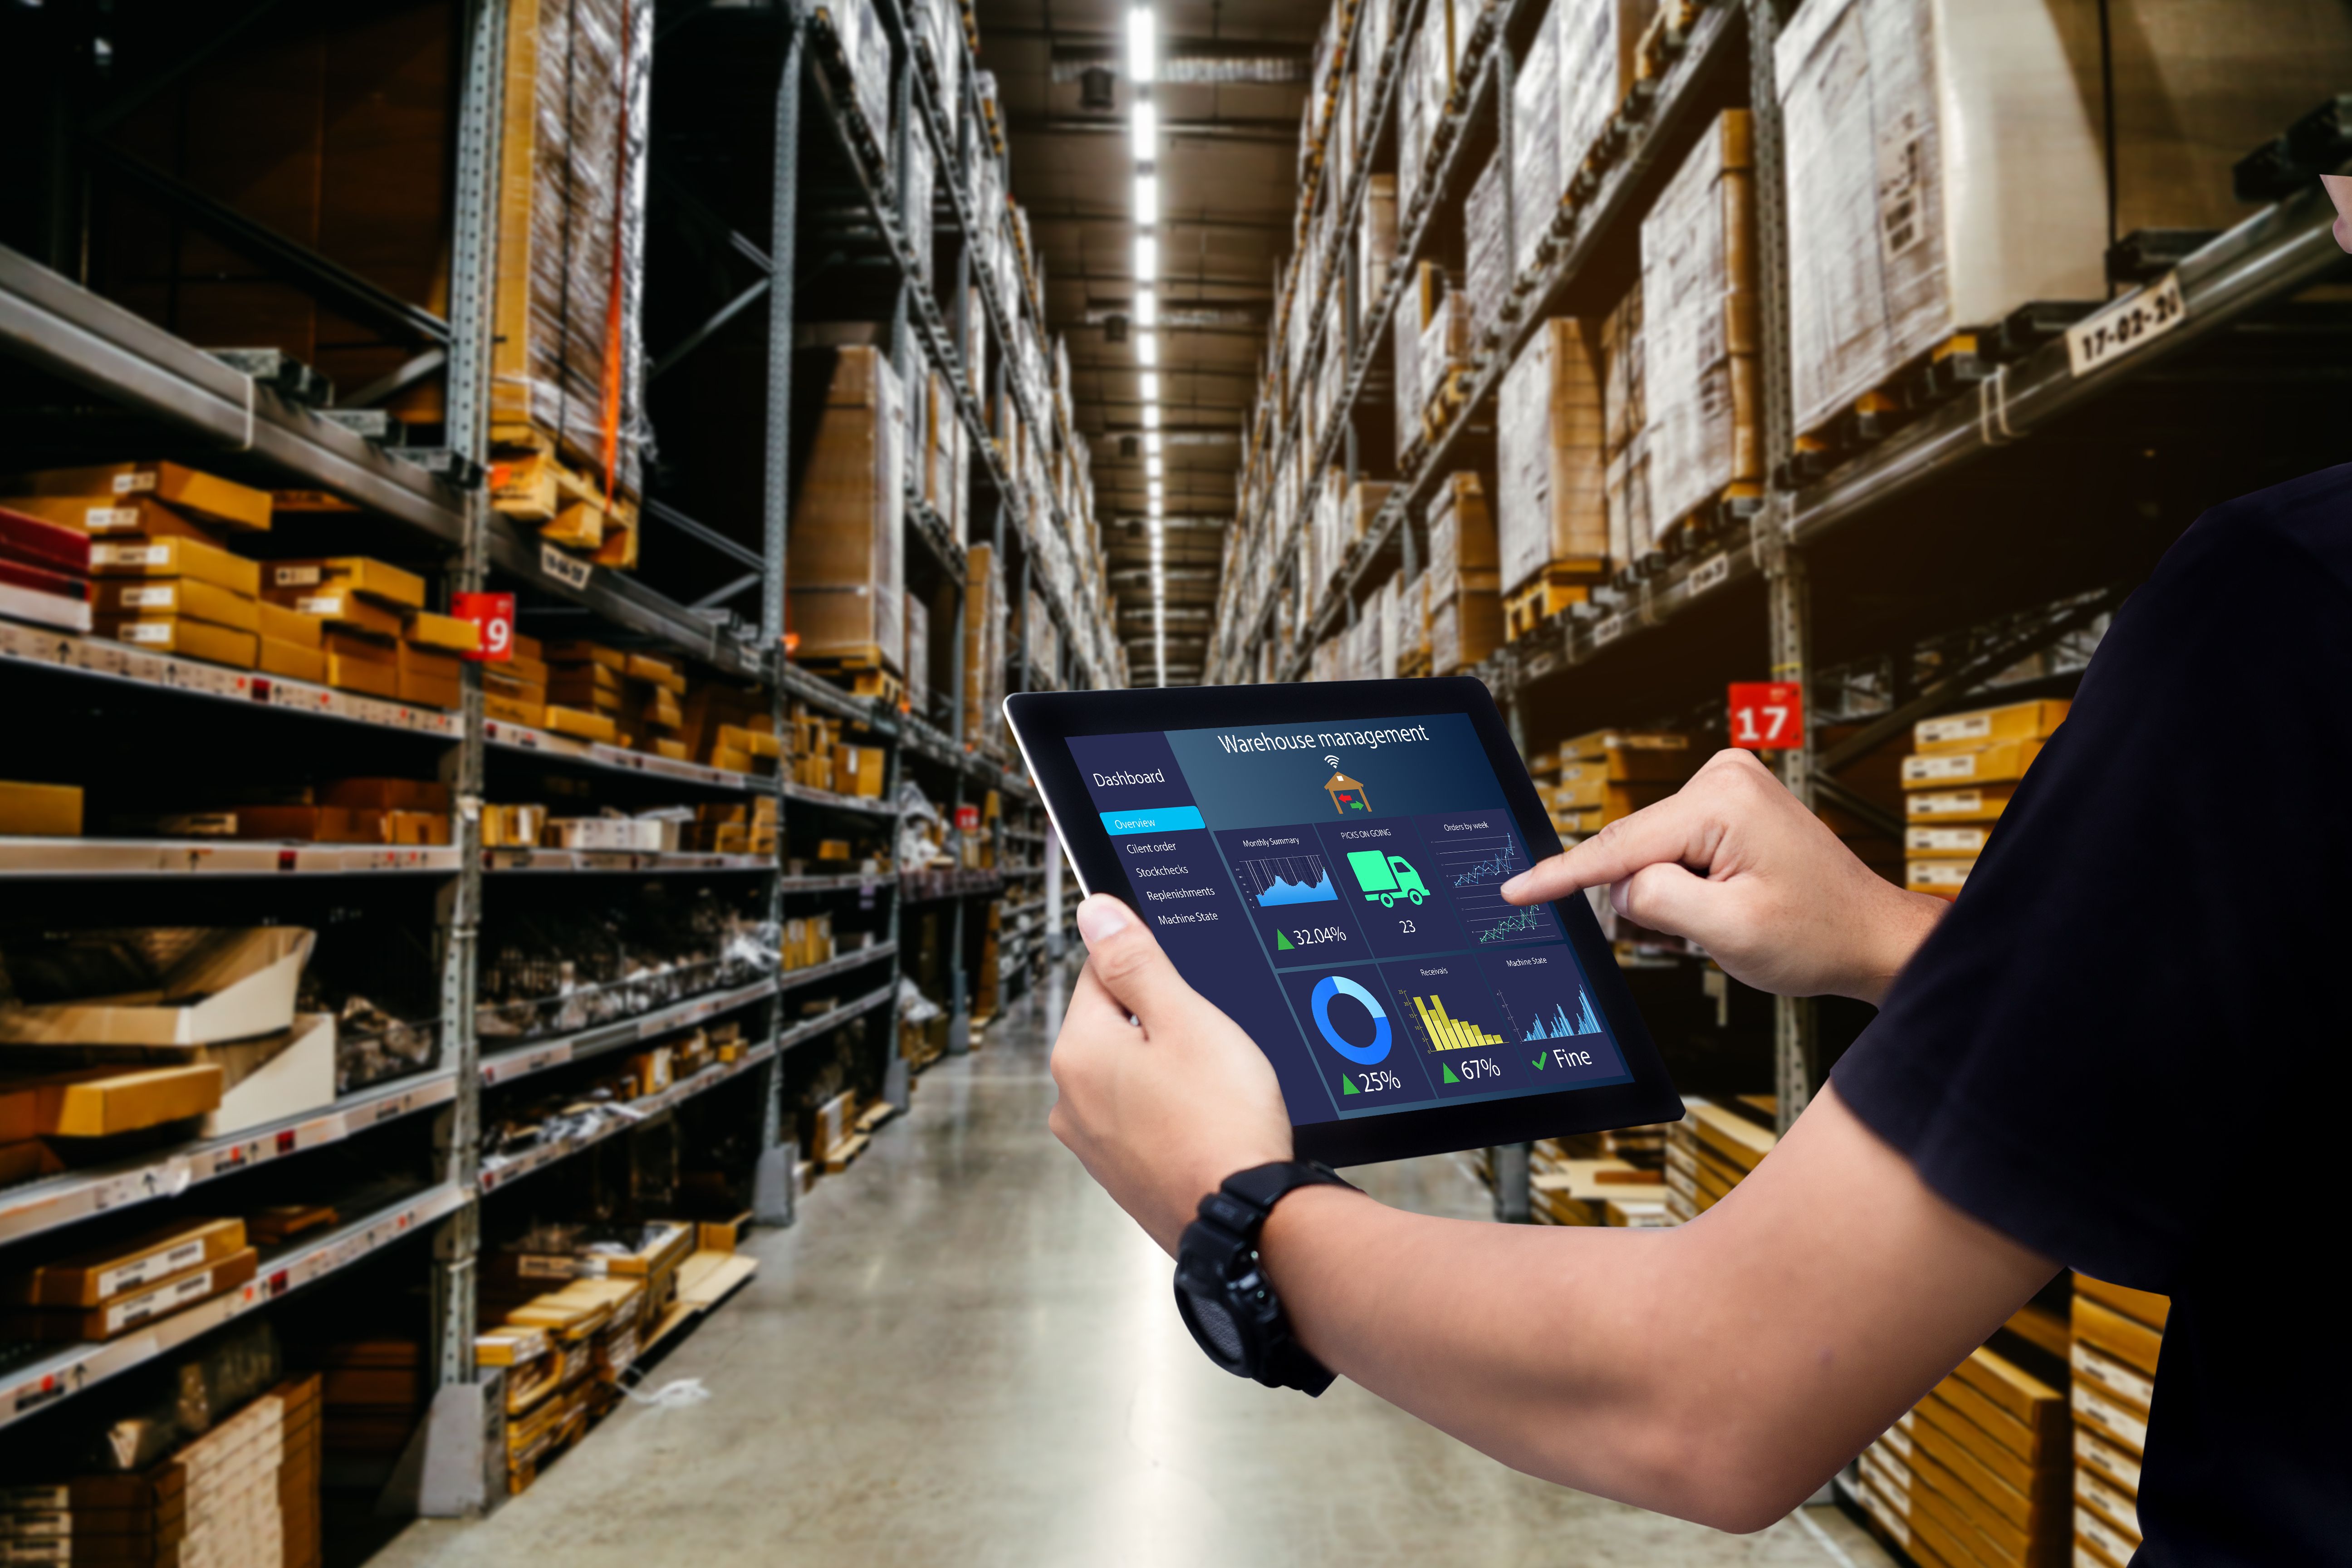 Man holding ipad in warehouse works to Improve sales and margins by integrating your TMS with a leading rate management platform allowing instant quoting and lead conversion.